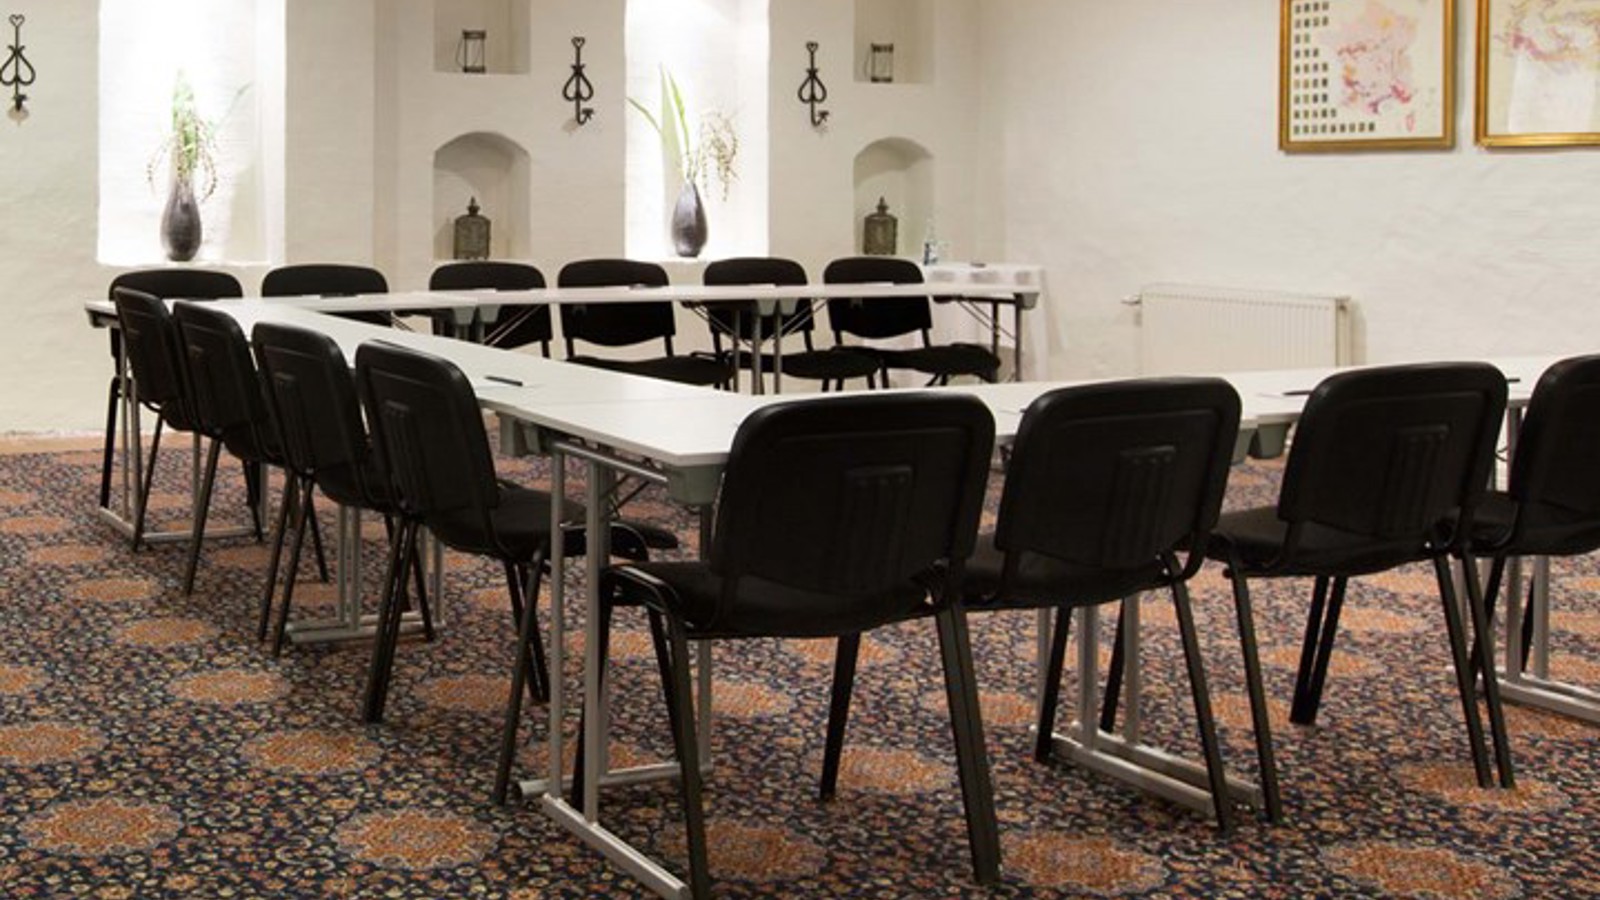 Conference room with u-shaped seating and patterned carpet